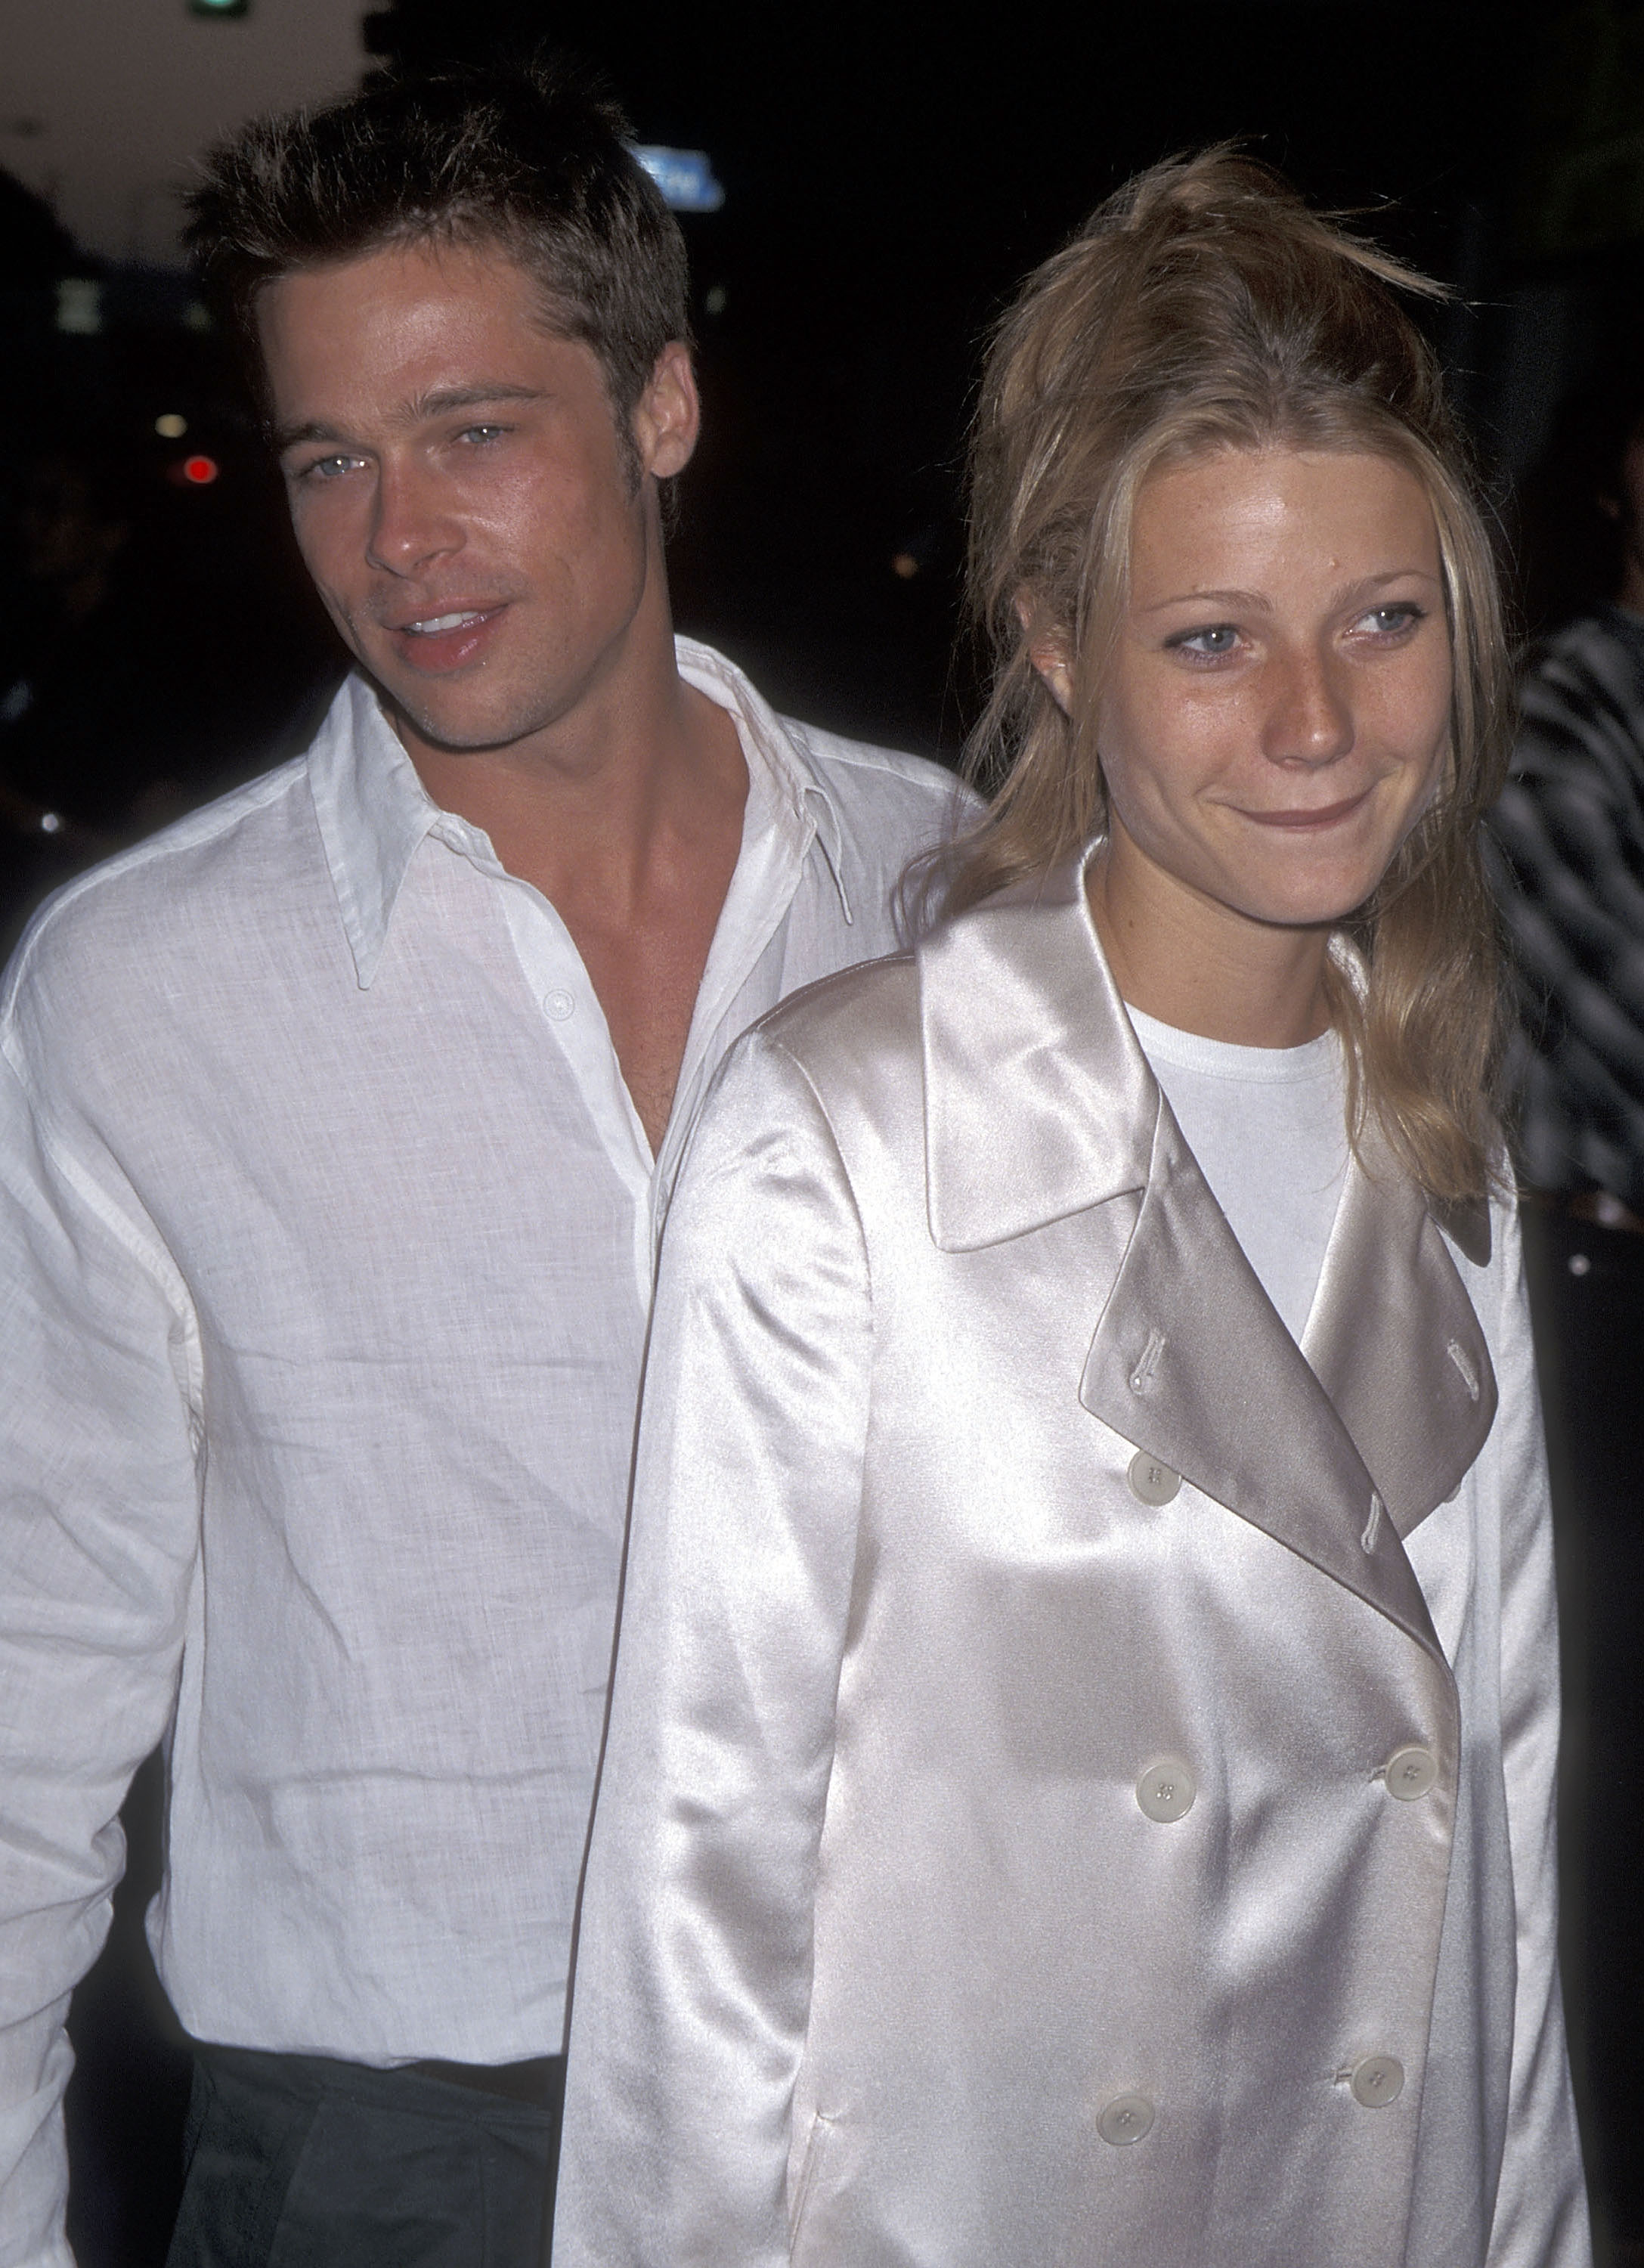 Brad Pitt and Gwyneth Paltrow at the "Living in Oblivion" premiere in West Los Angeles, California on July 12, 1995 | Source: Getty Images